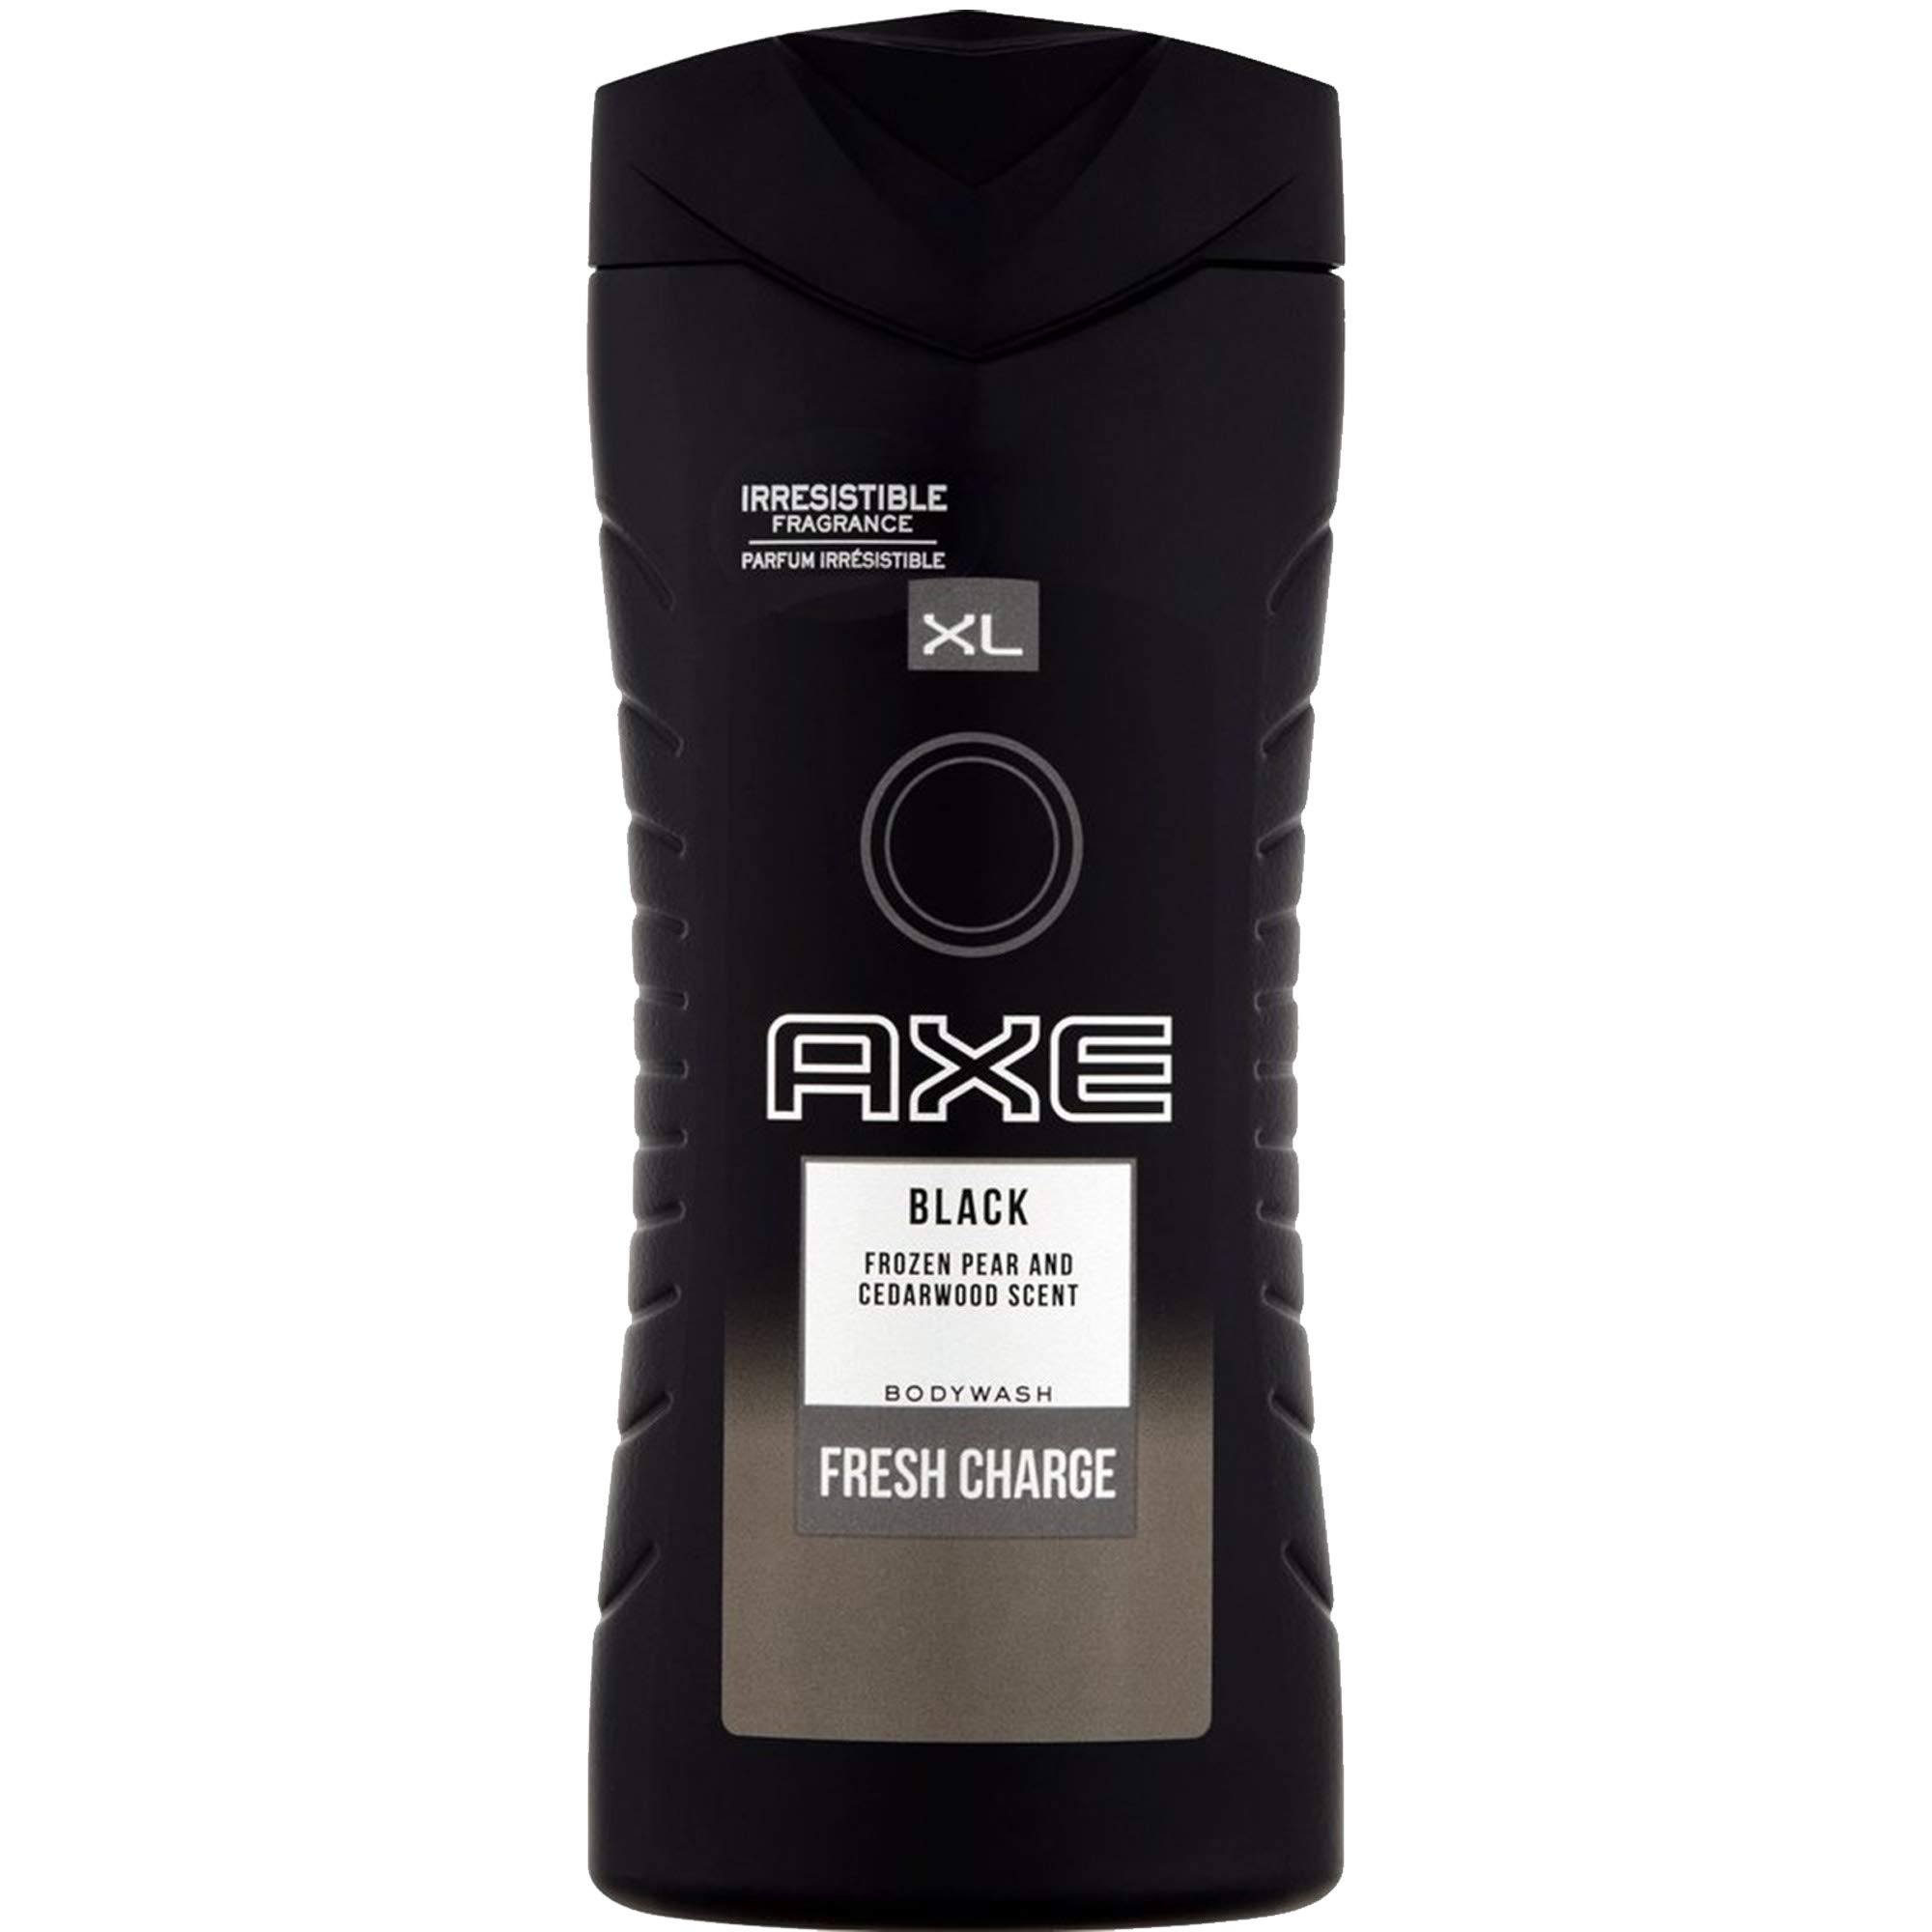 Axe Body Wash For Men, Black, Frozen Pear and Cedarwood Scent, Fresh Charge Shower Gel for Body, 3 Pk x 13.52 Fl.Oz each